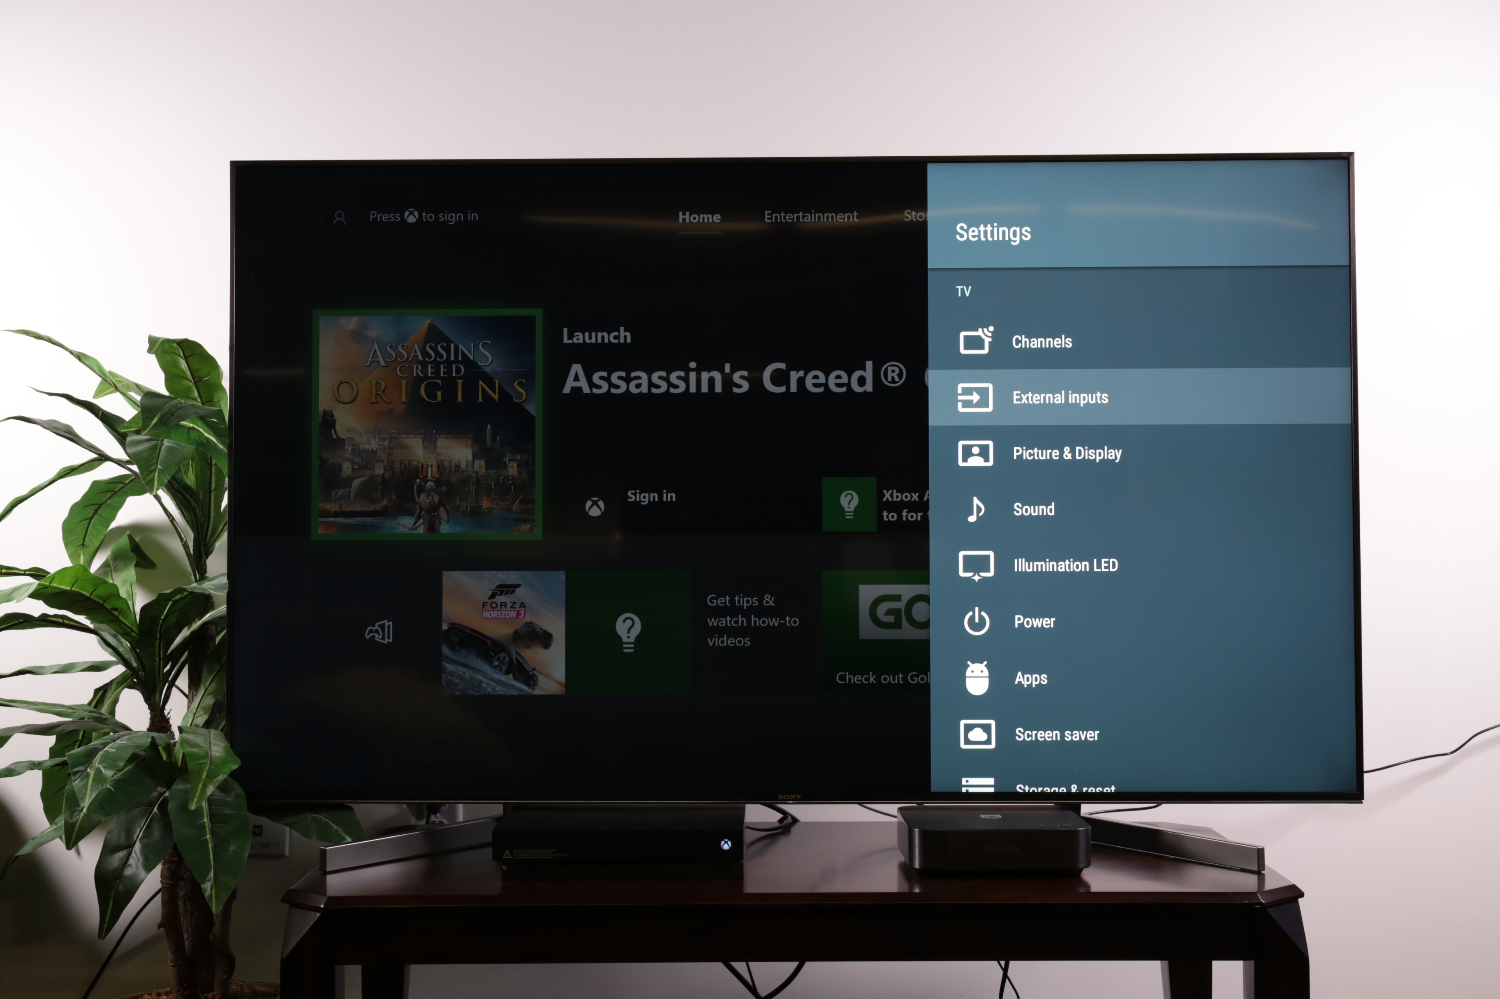 How to connect devices to your Sony TV Sony Bravia Android TV